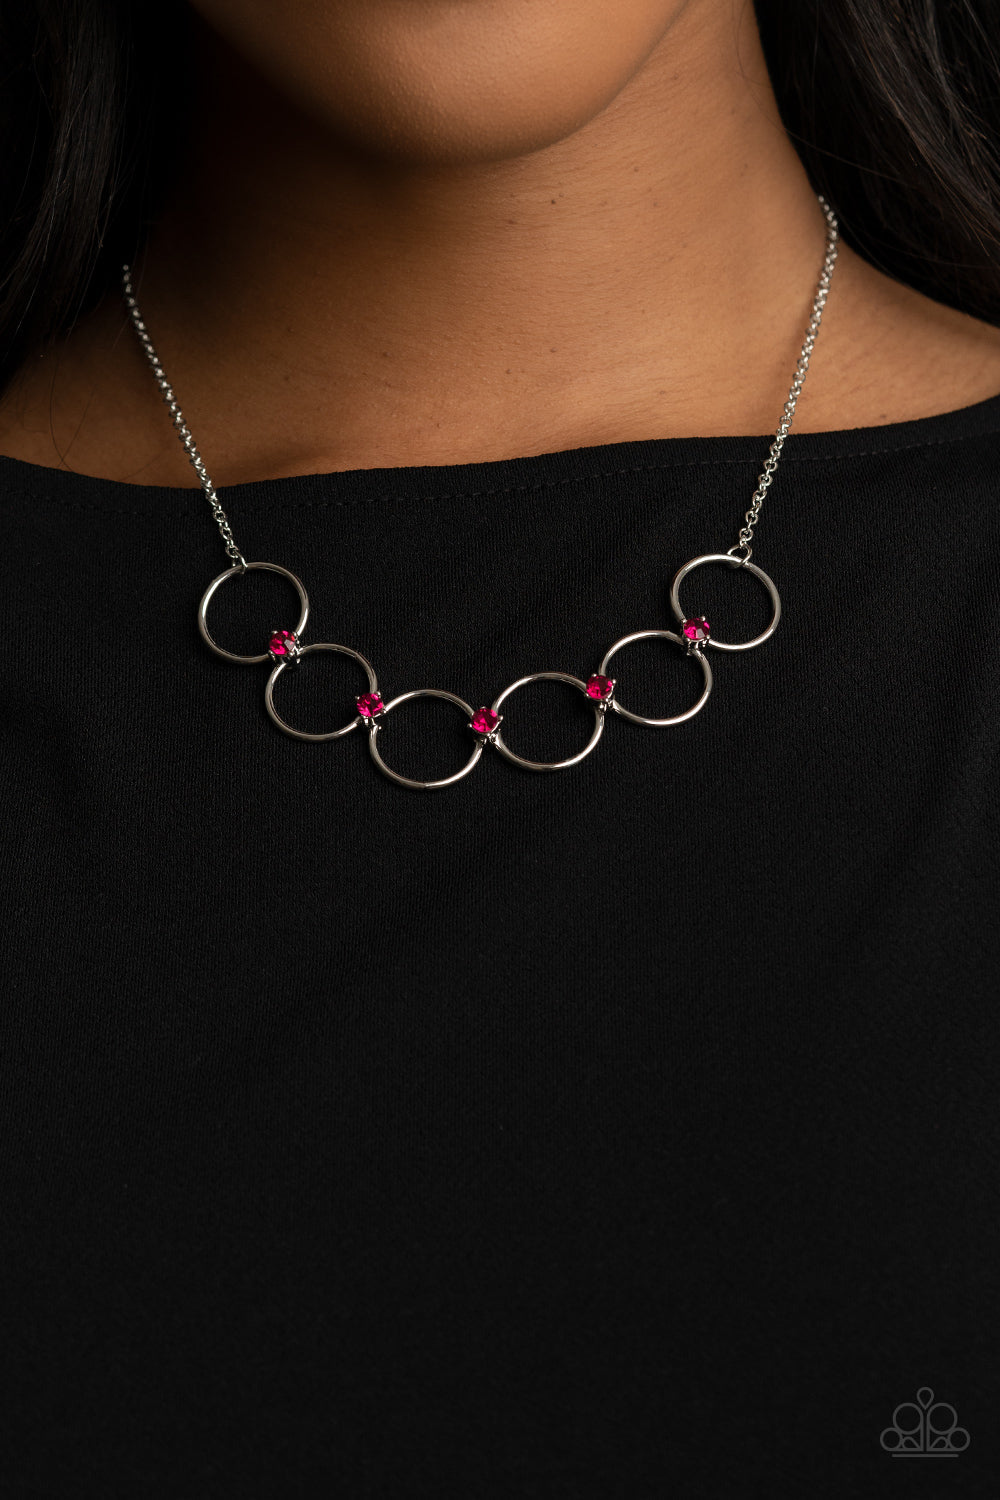 Regal Society - Pink and Silver Necklace - Paparazzi Accessories - Glittery pink rhinestones link a dainty row of silver rings below the collar, creating a regal minimalist inspired display. Features an adjustable clasp closure. Sold as one individual necklace.